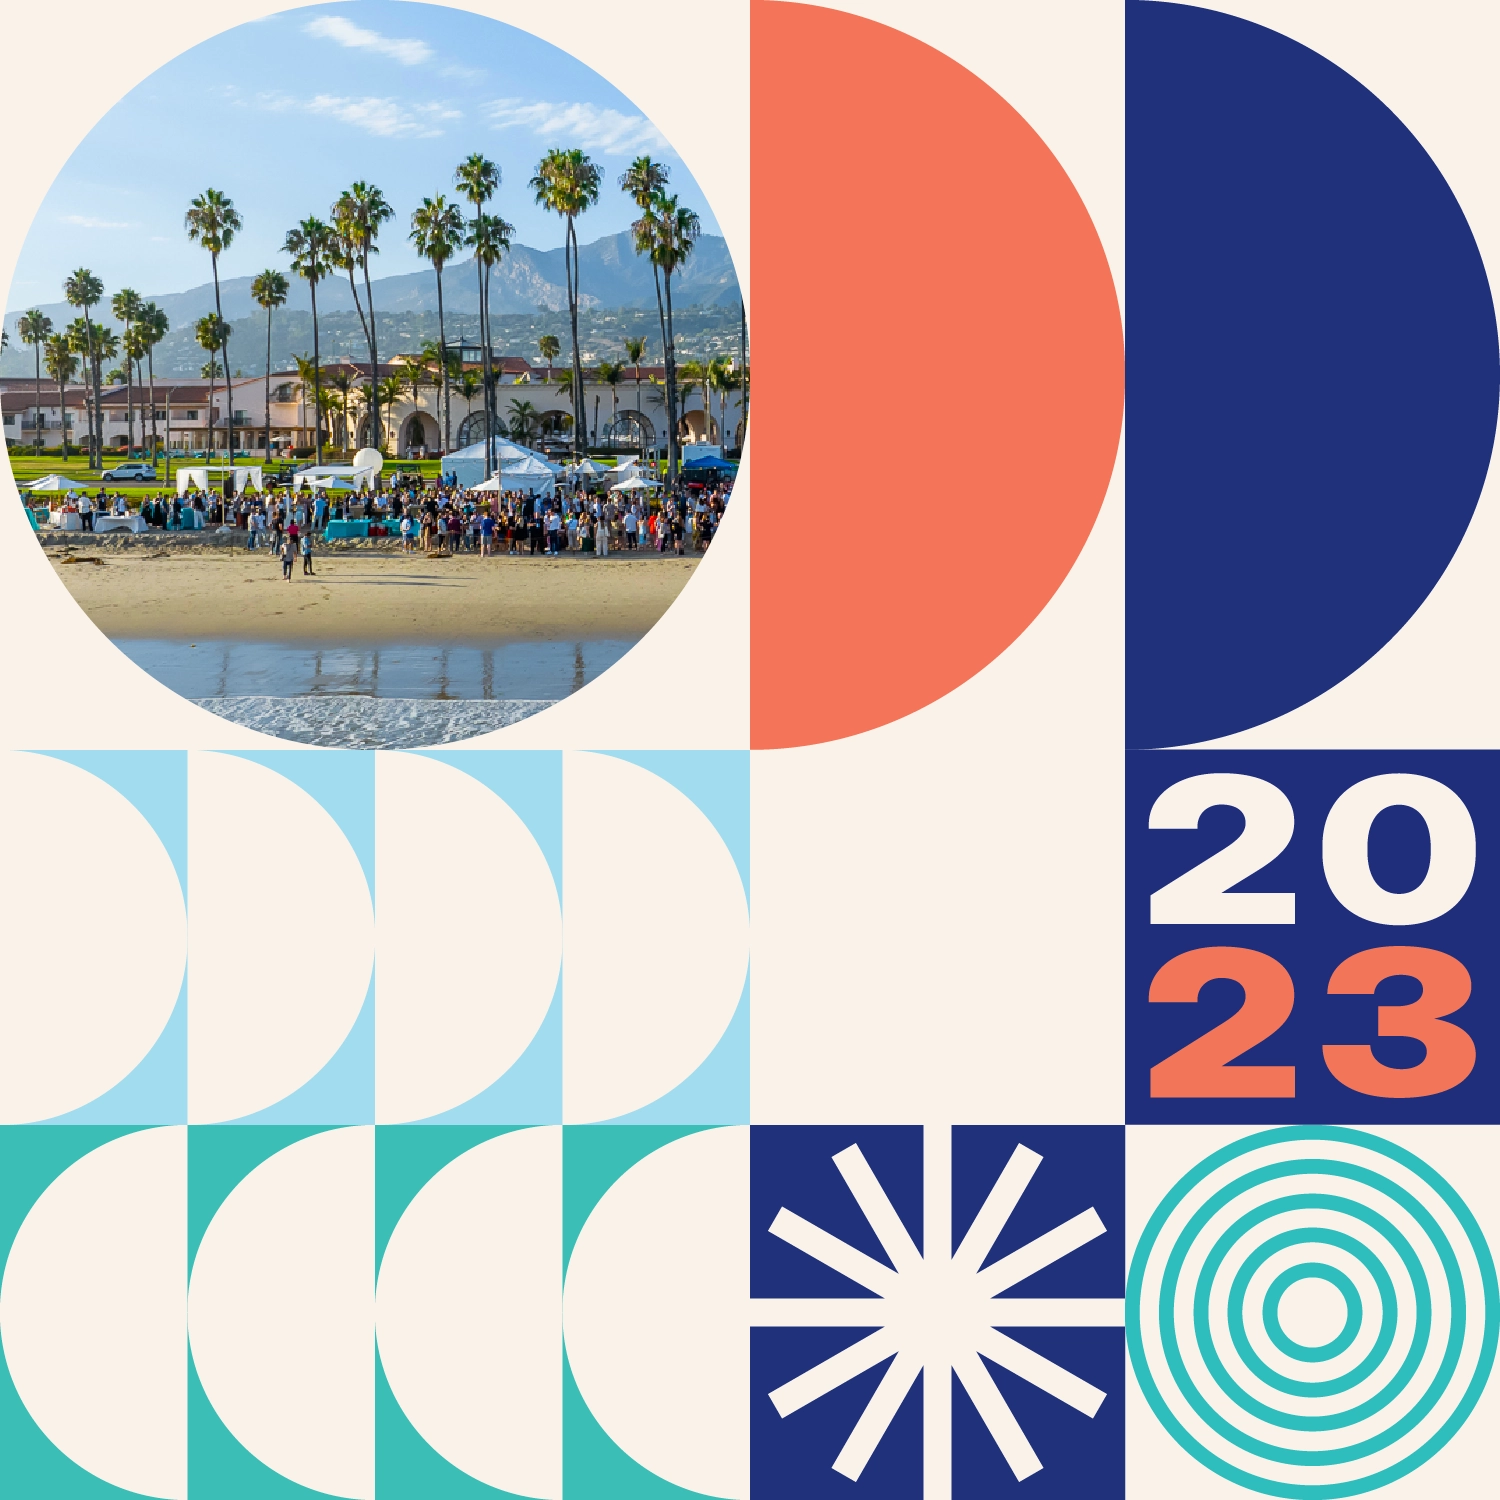 Hero image for CJU23. Fun colors and shapes and an image of the CJU22 beach party. 